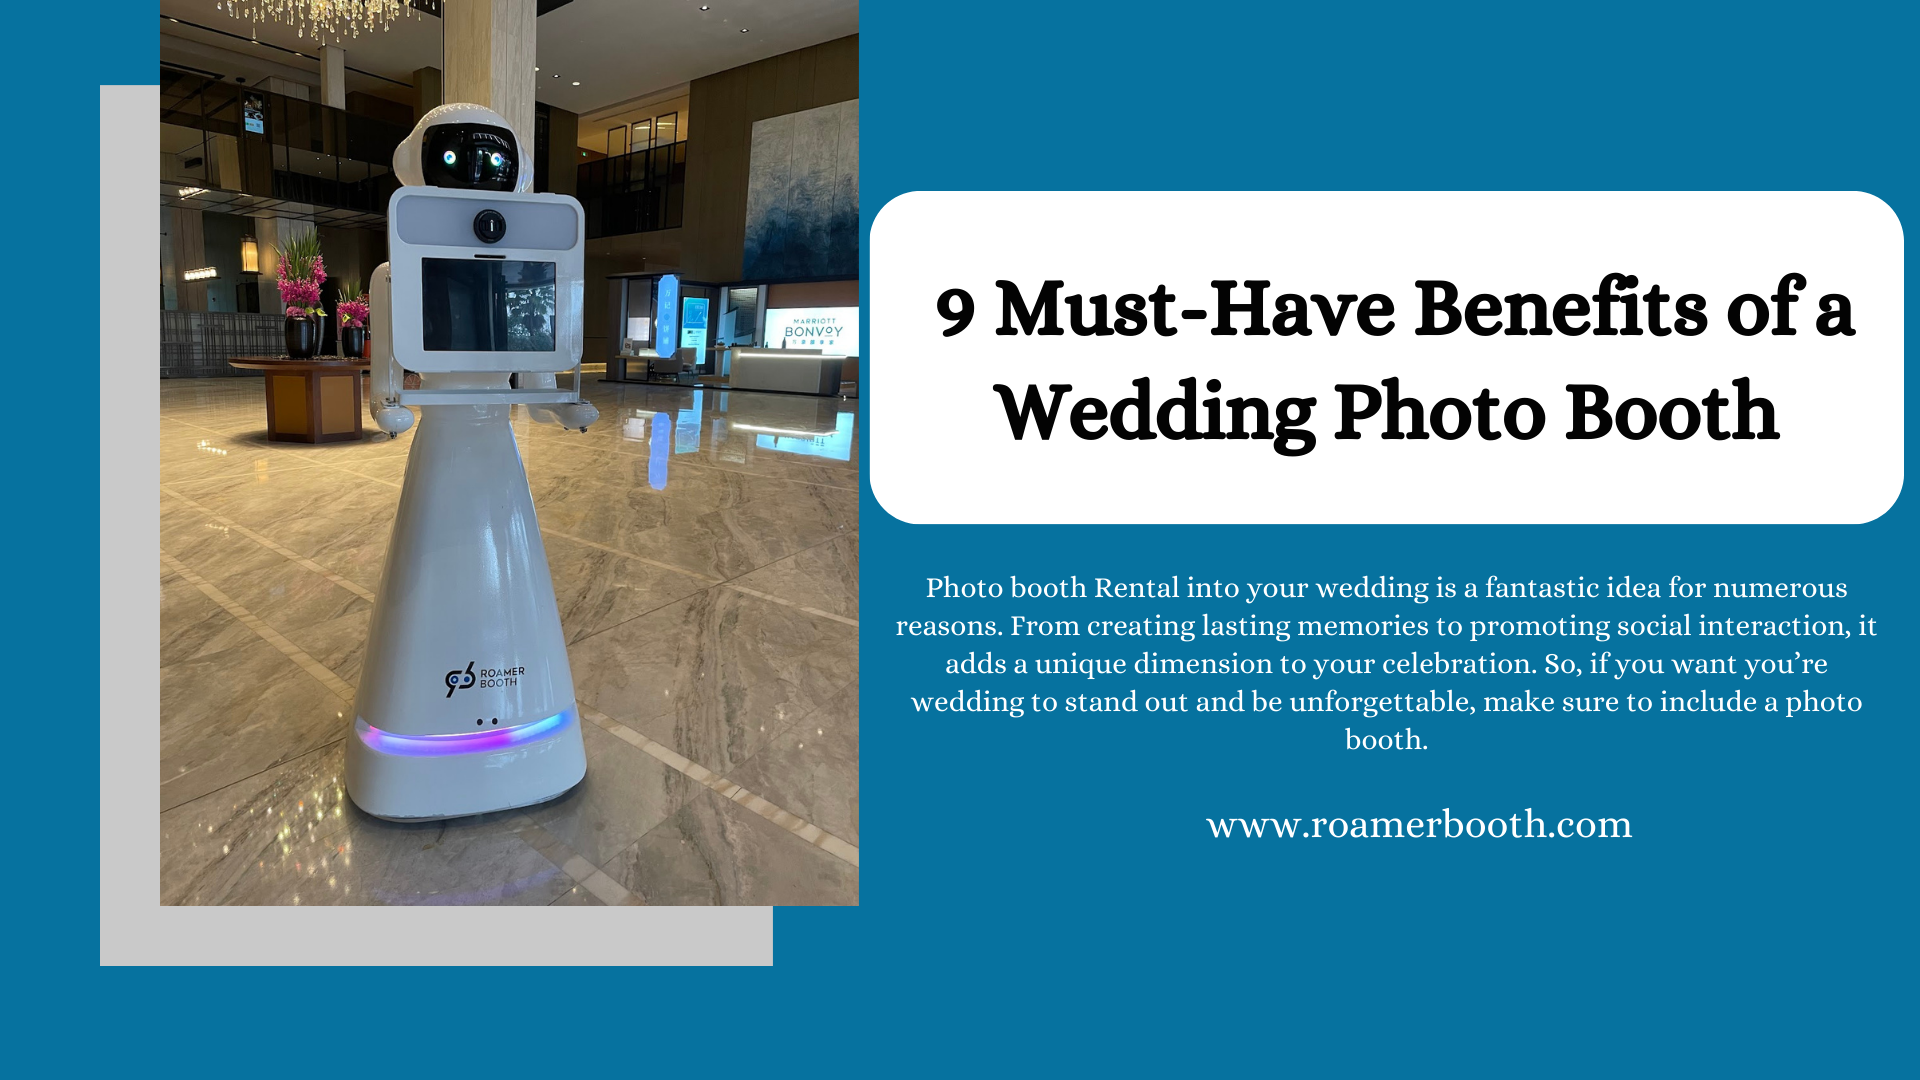 Frame-Worthy Moments: The 9 Must-Have Benefits of a Wedding Photo Booth -